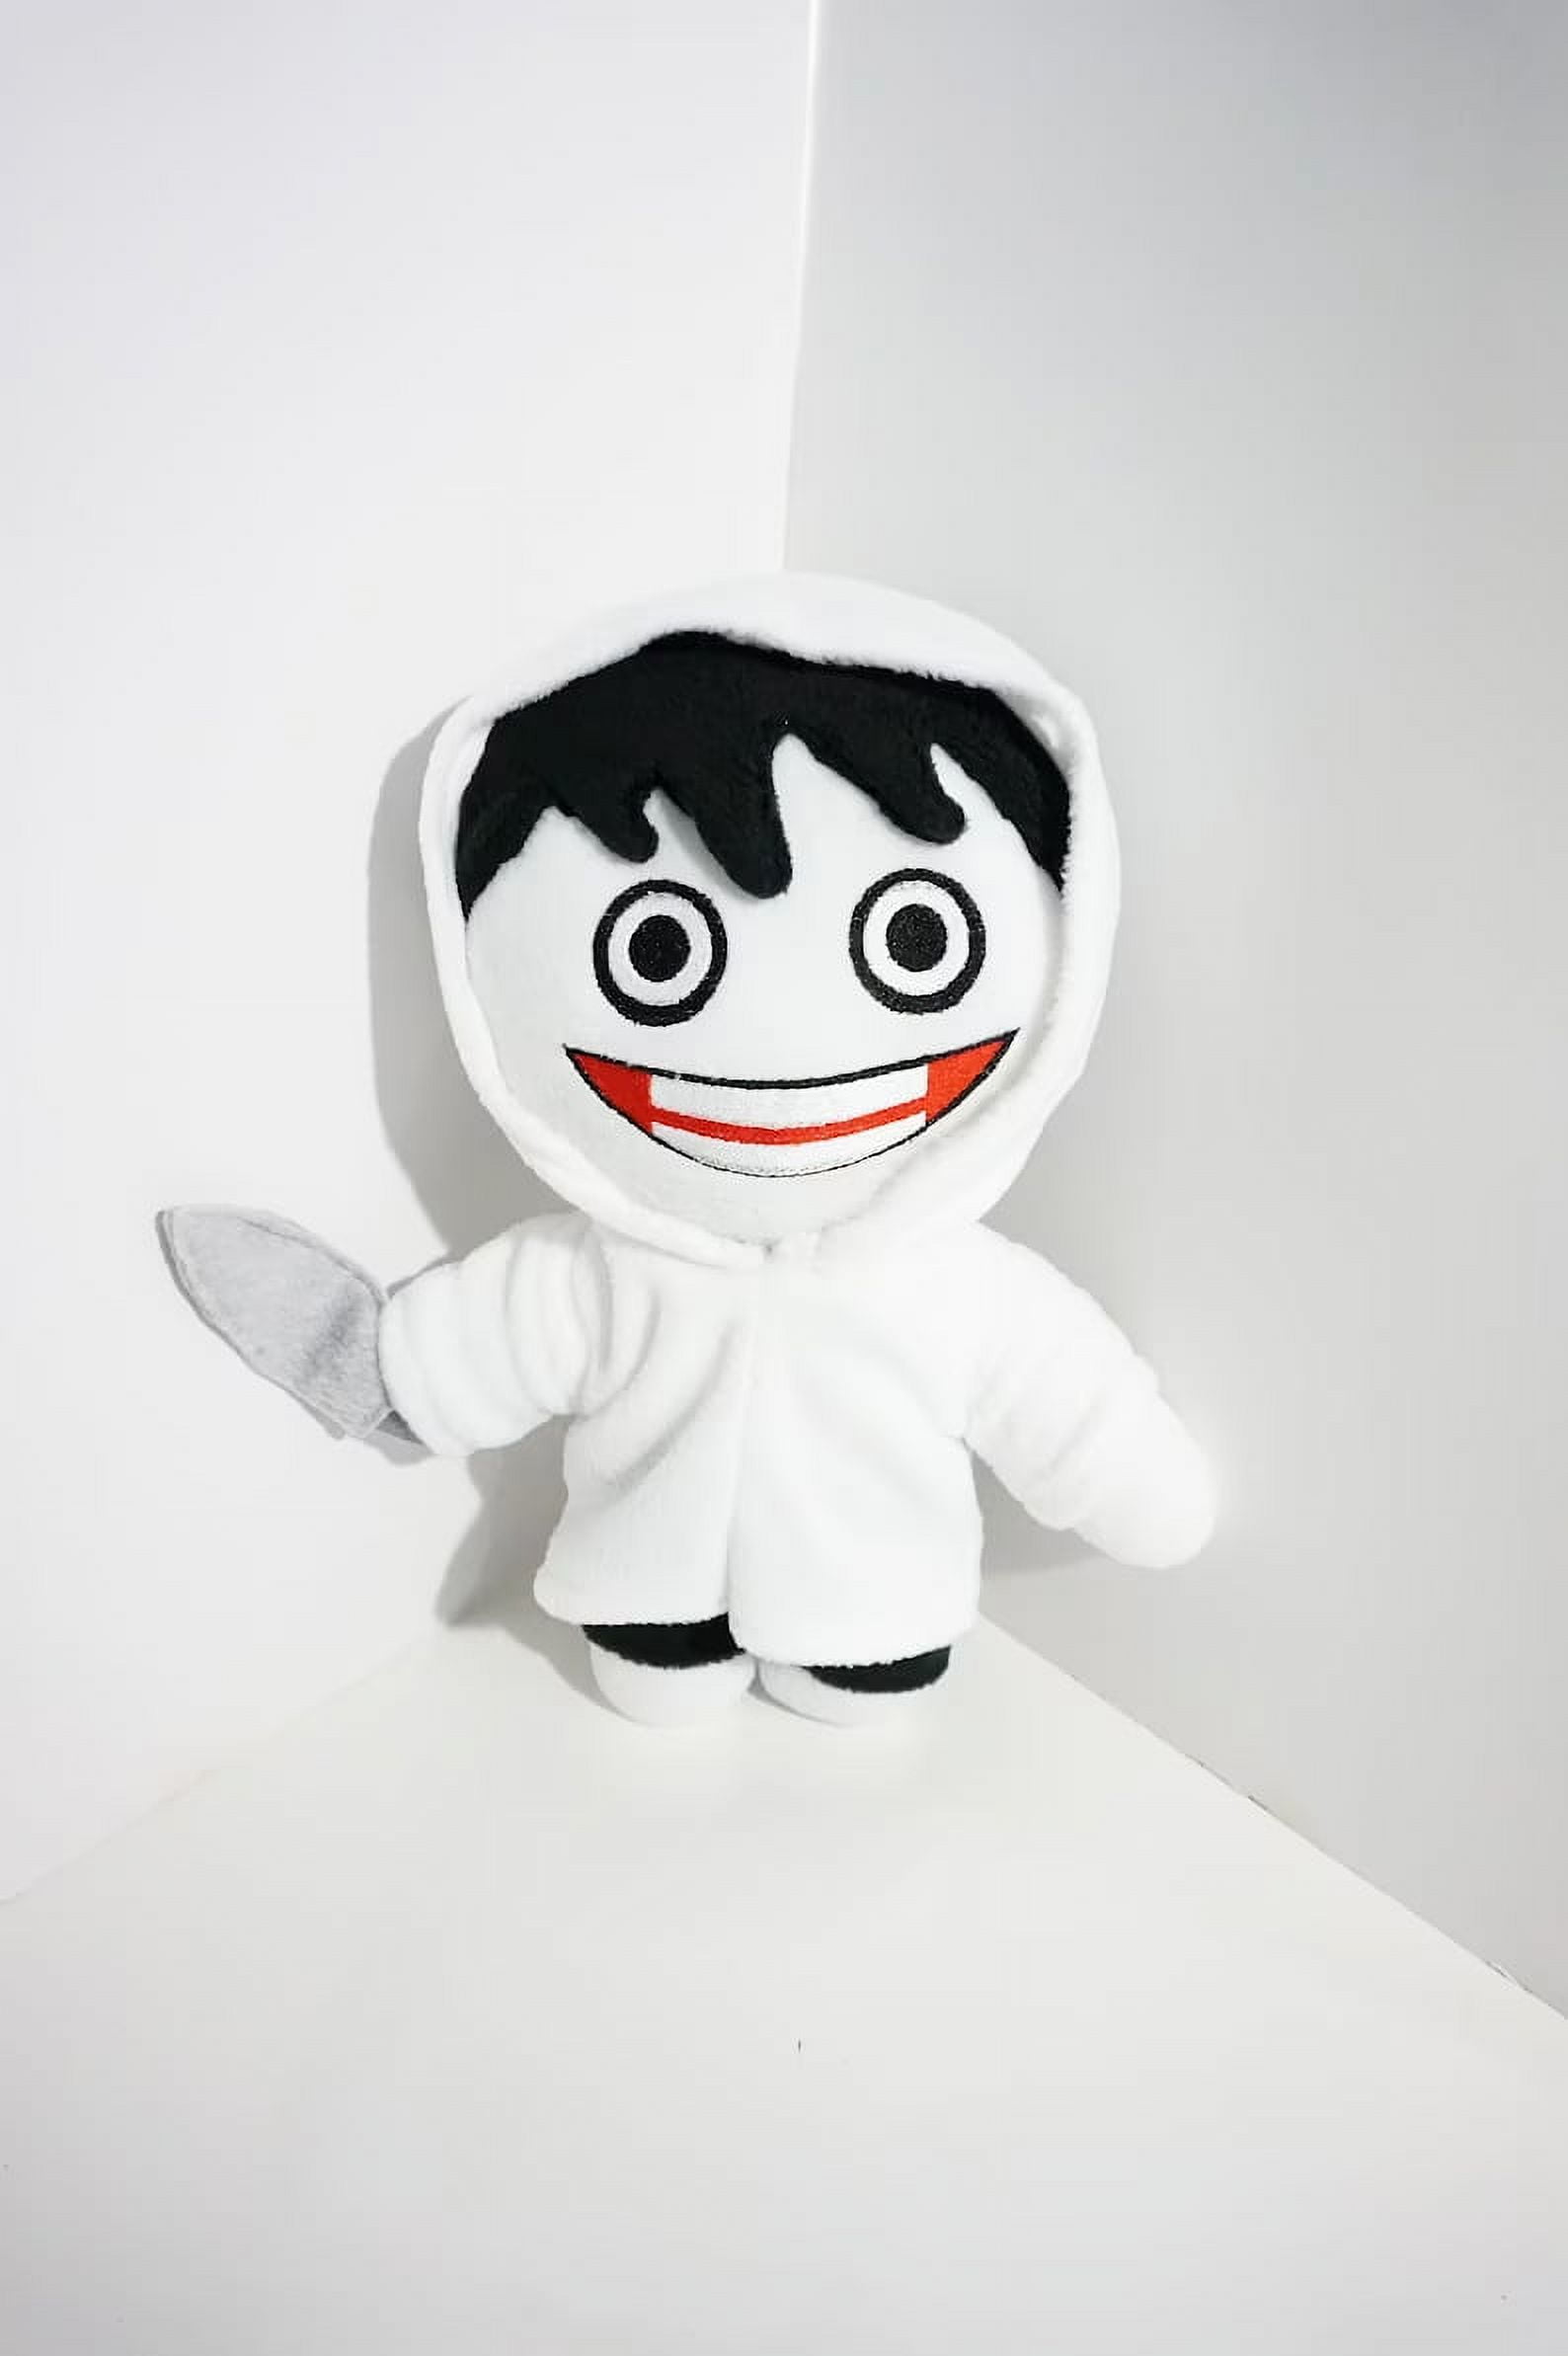 Doors Plush - 7 Rush Plushies Toy for Fans Gift, 2022 New Monster Horror  Game Stuffed Figure Doll for Kids and Adults, Halloween Christmas Birthday